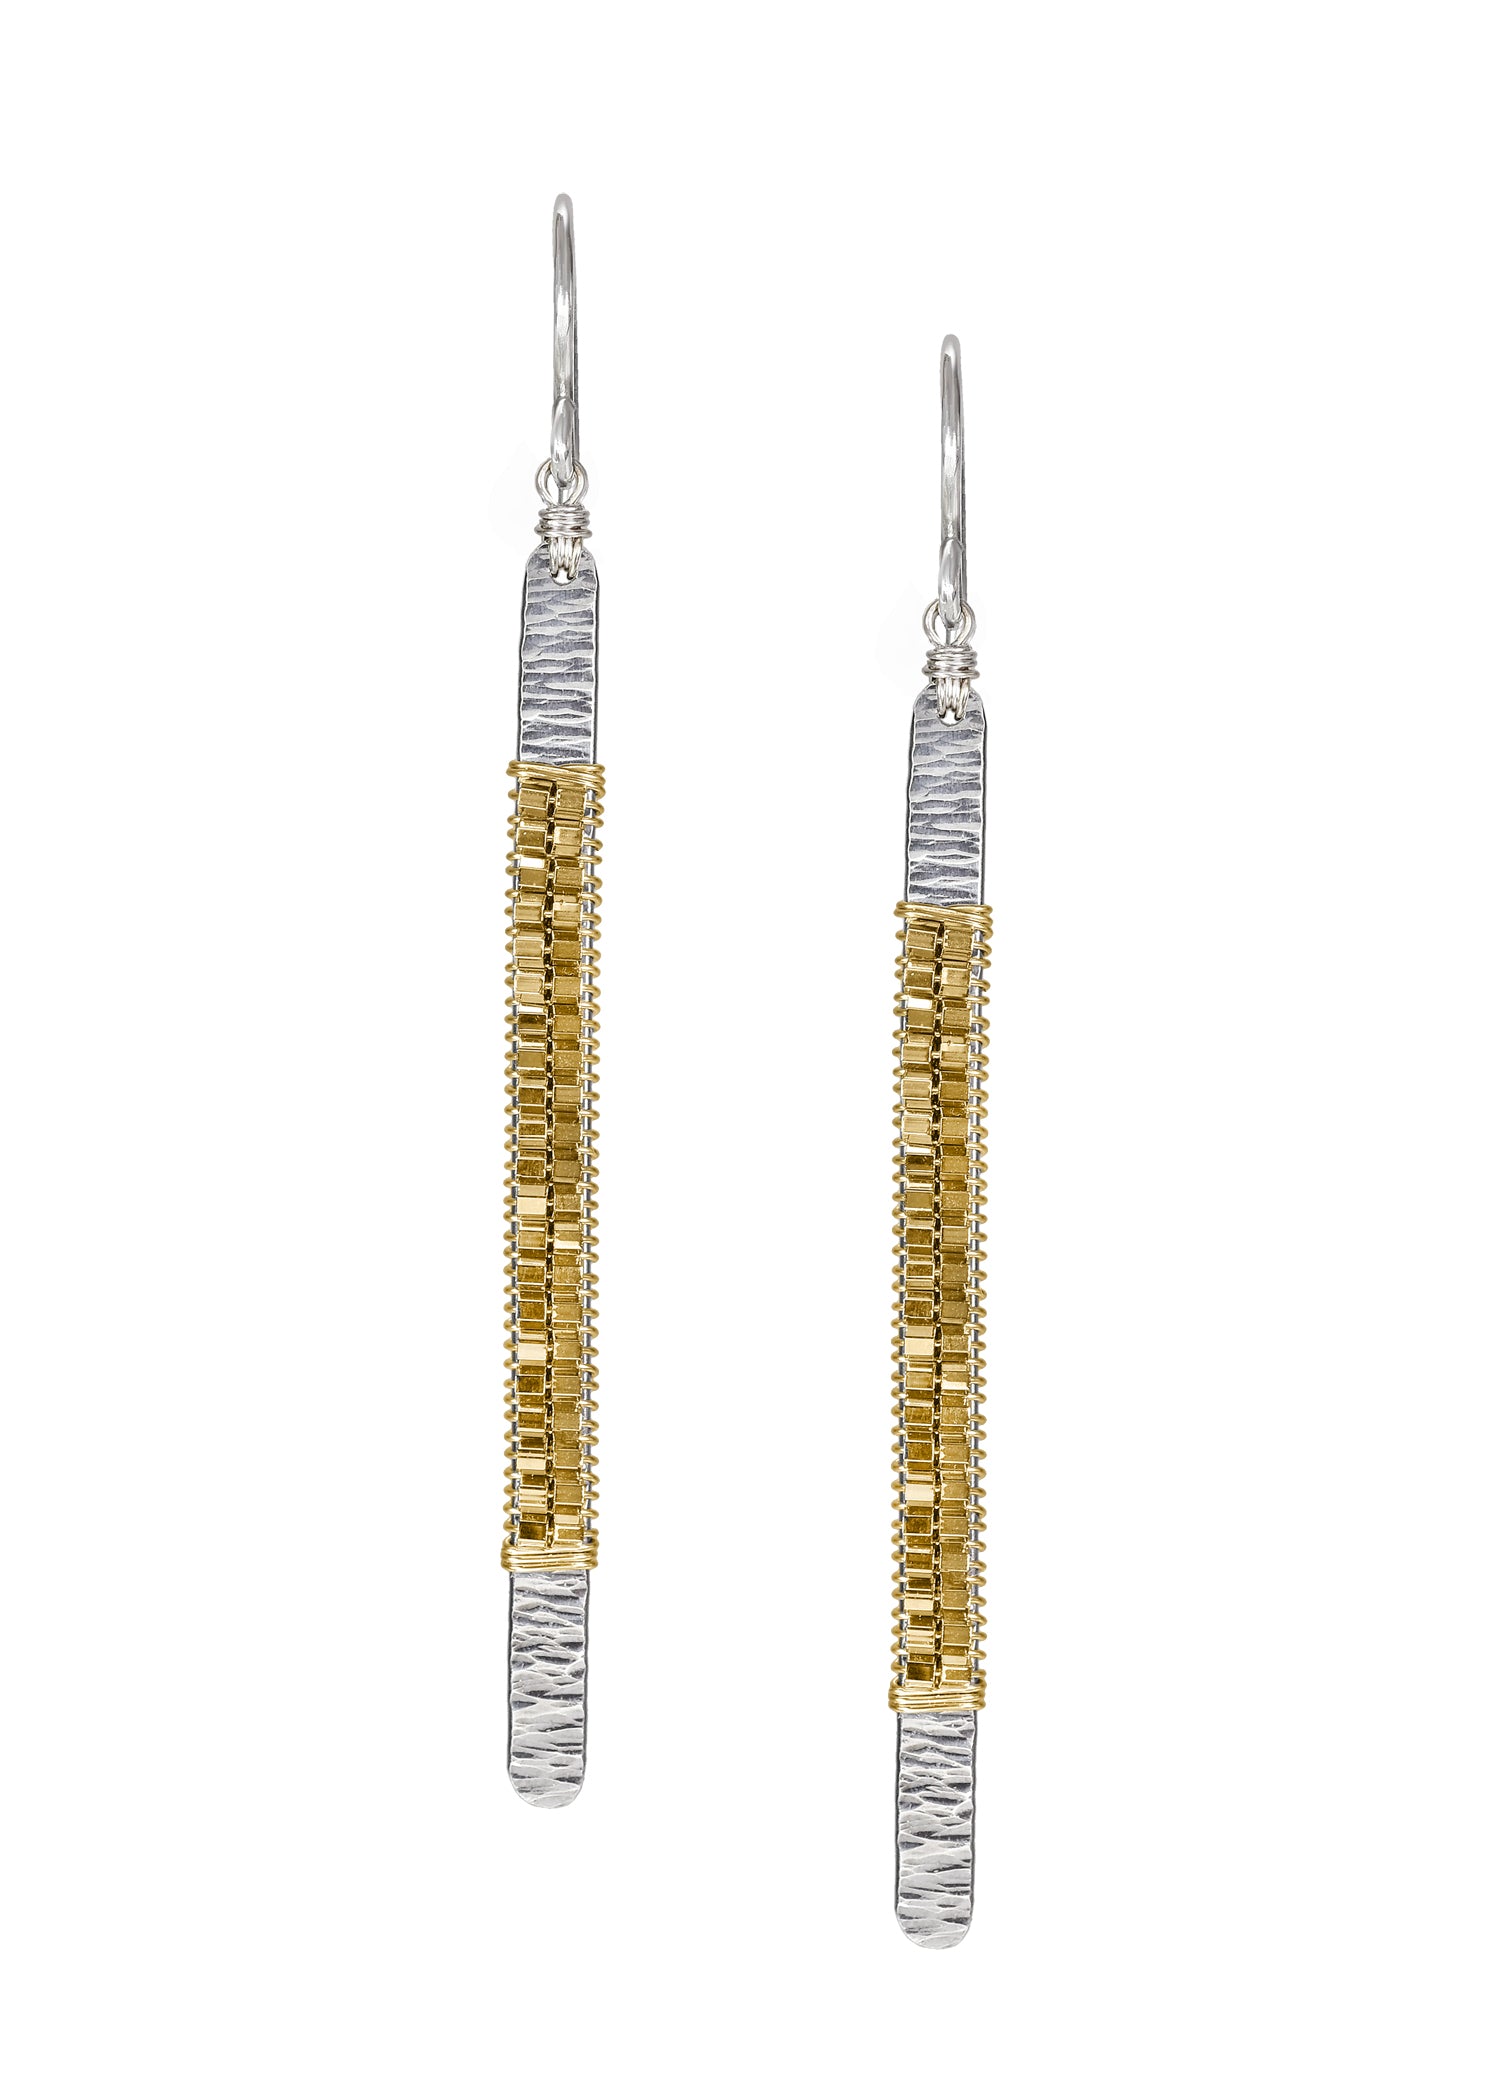 14k gold fill Sterling silver Seed beads Earrings measure 2-1/4" in length (including the ear wires) and 1/8" in width Handmade in our Los Angeles studio